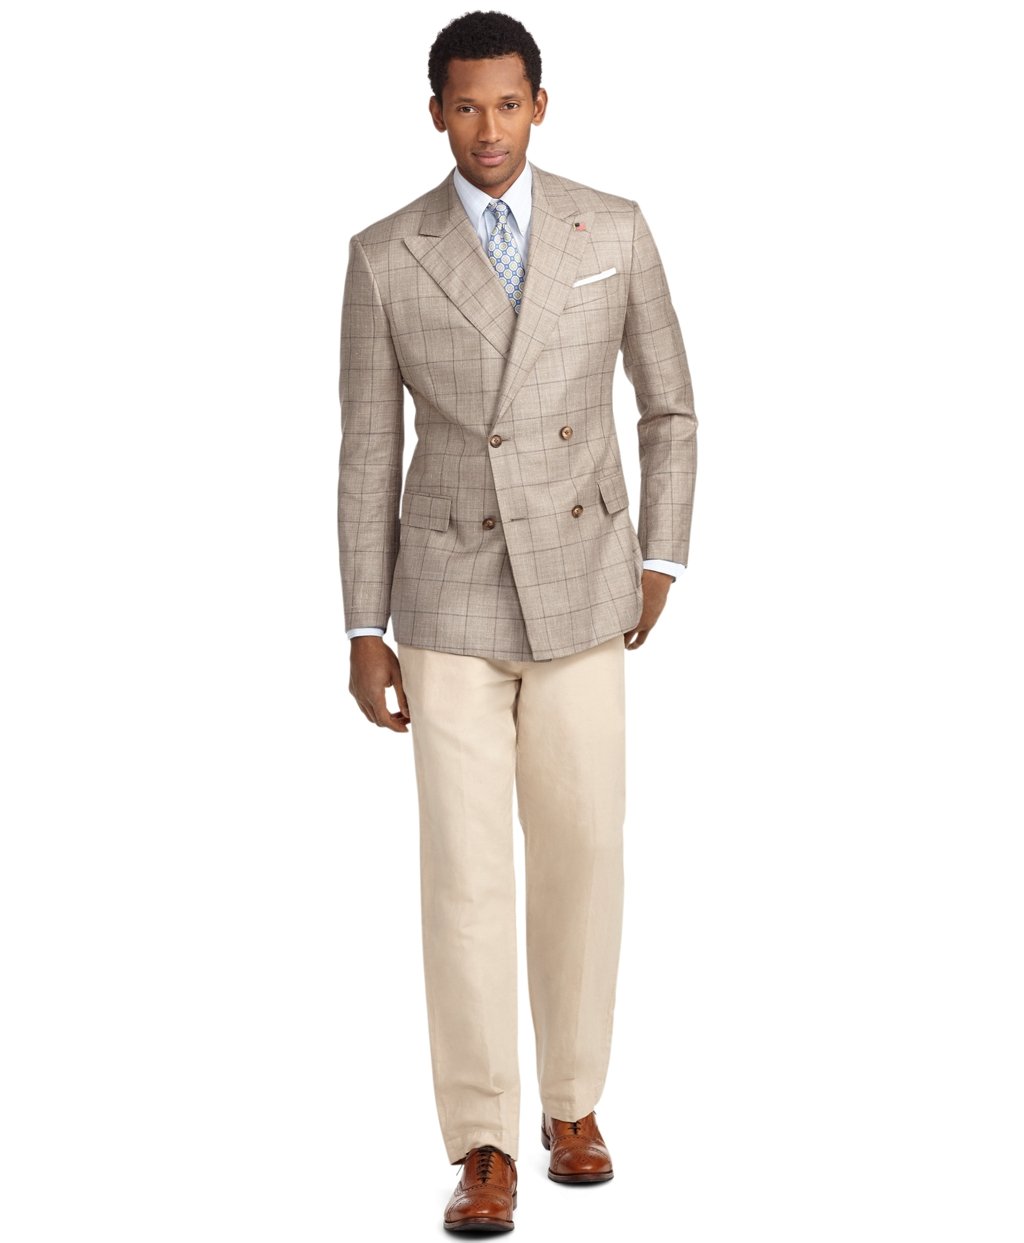 Men’s Sports Blazers and How To Wear Them This Holiday Season